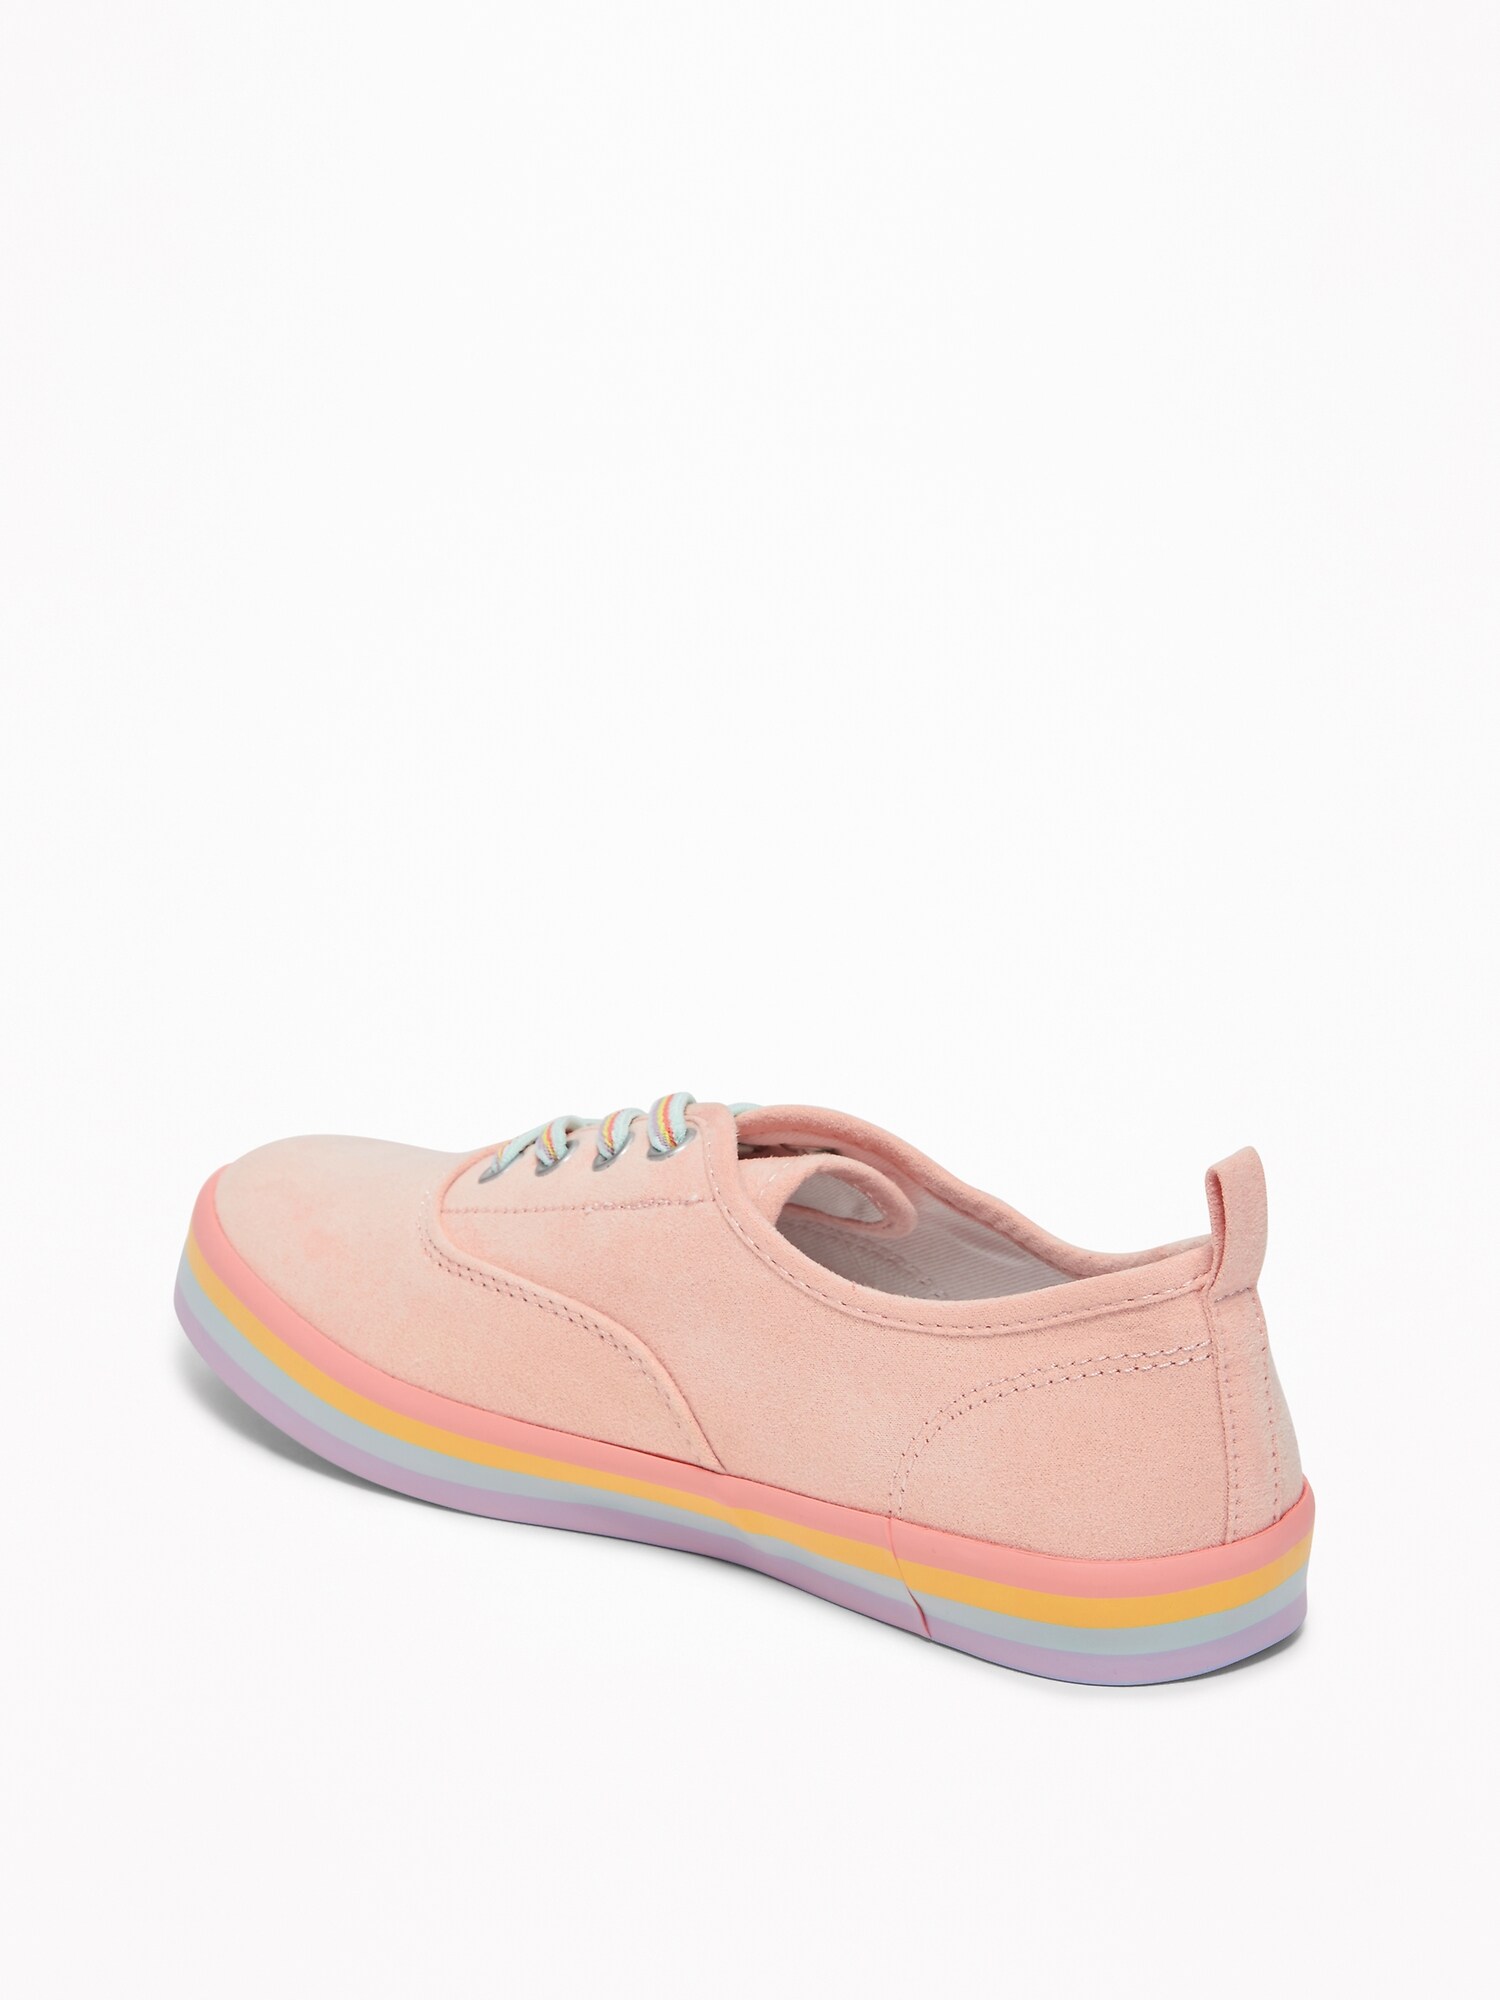 Pink-Sueded Elastic-Lace Rainbow Sneakers for Girls | Old Navy